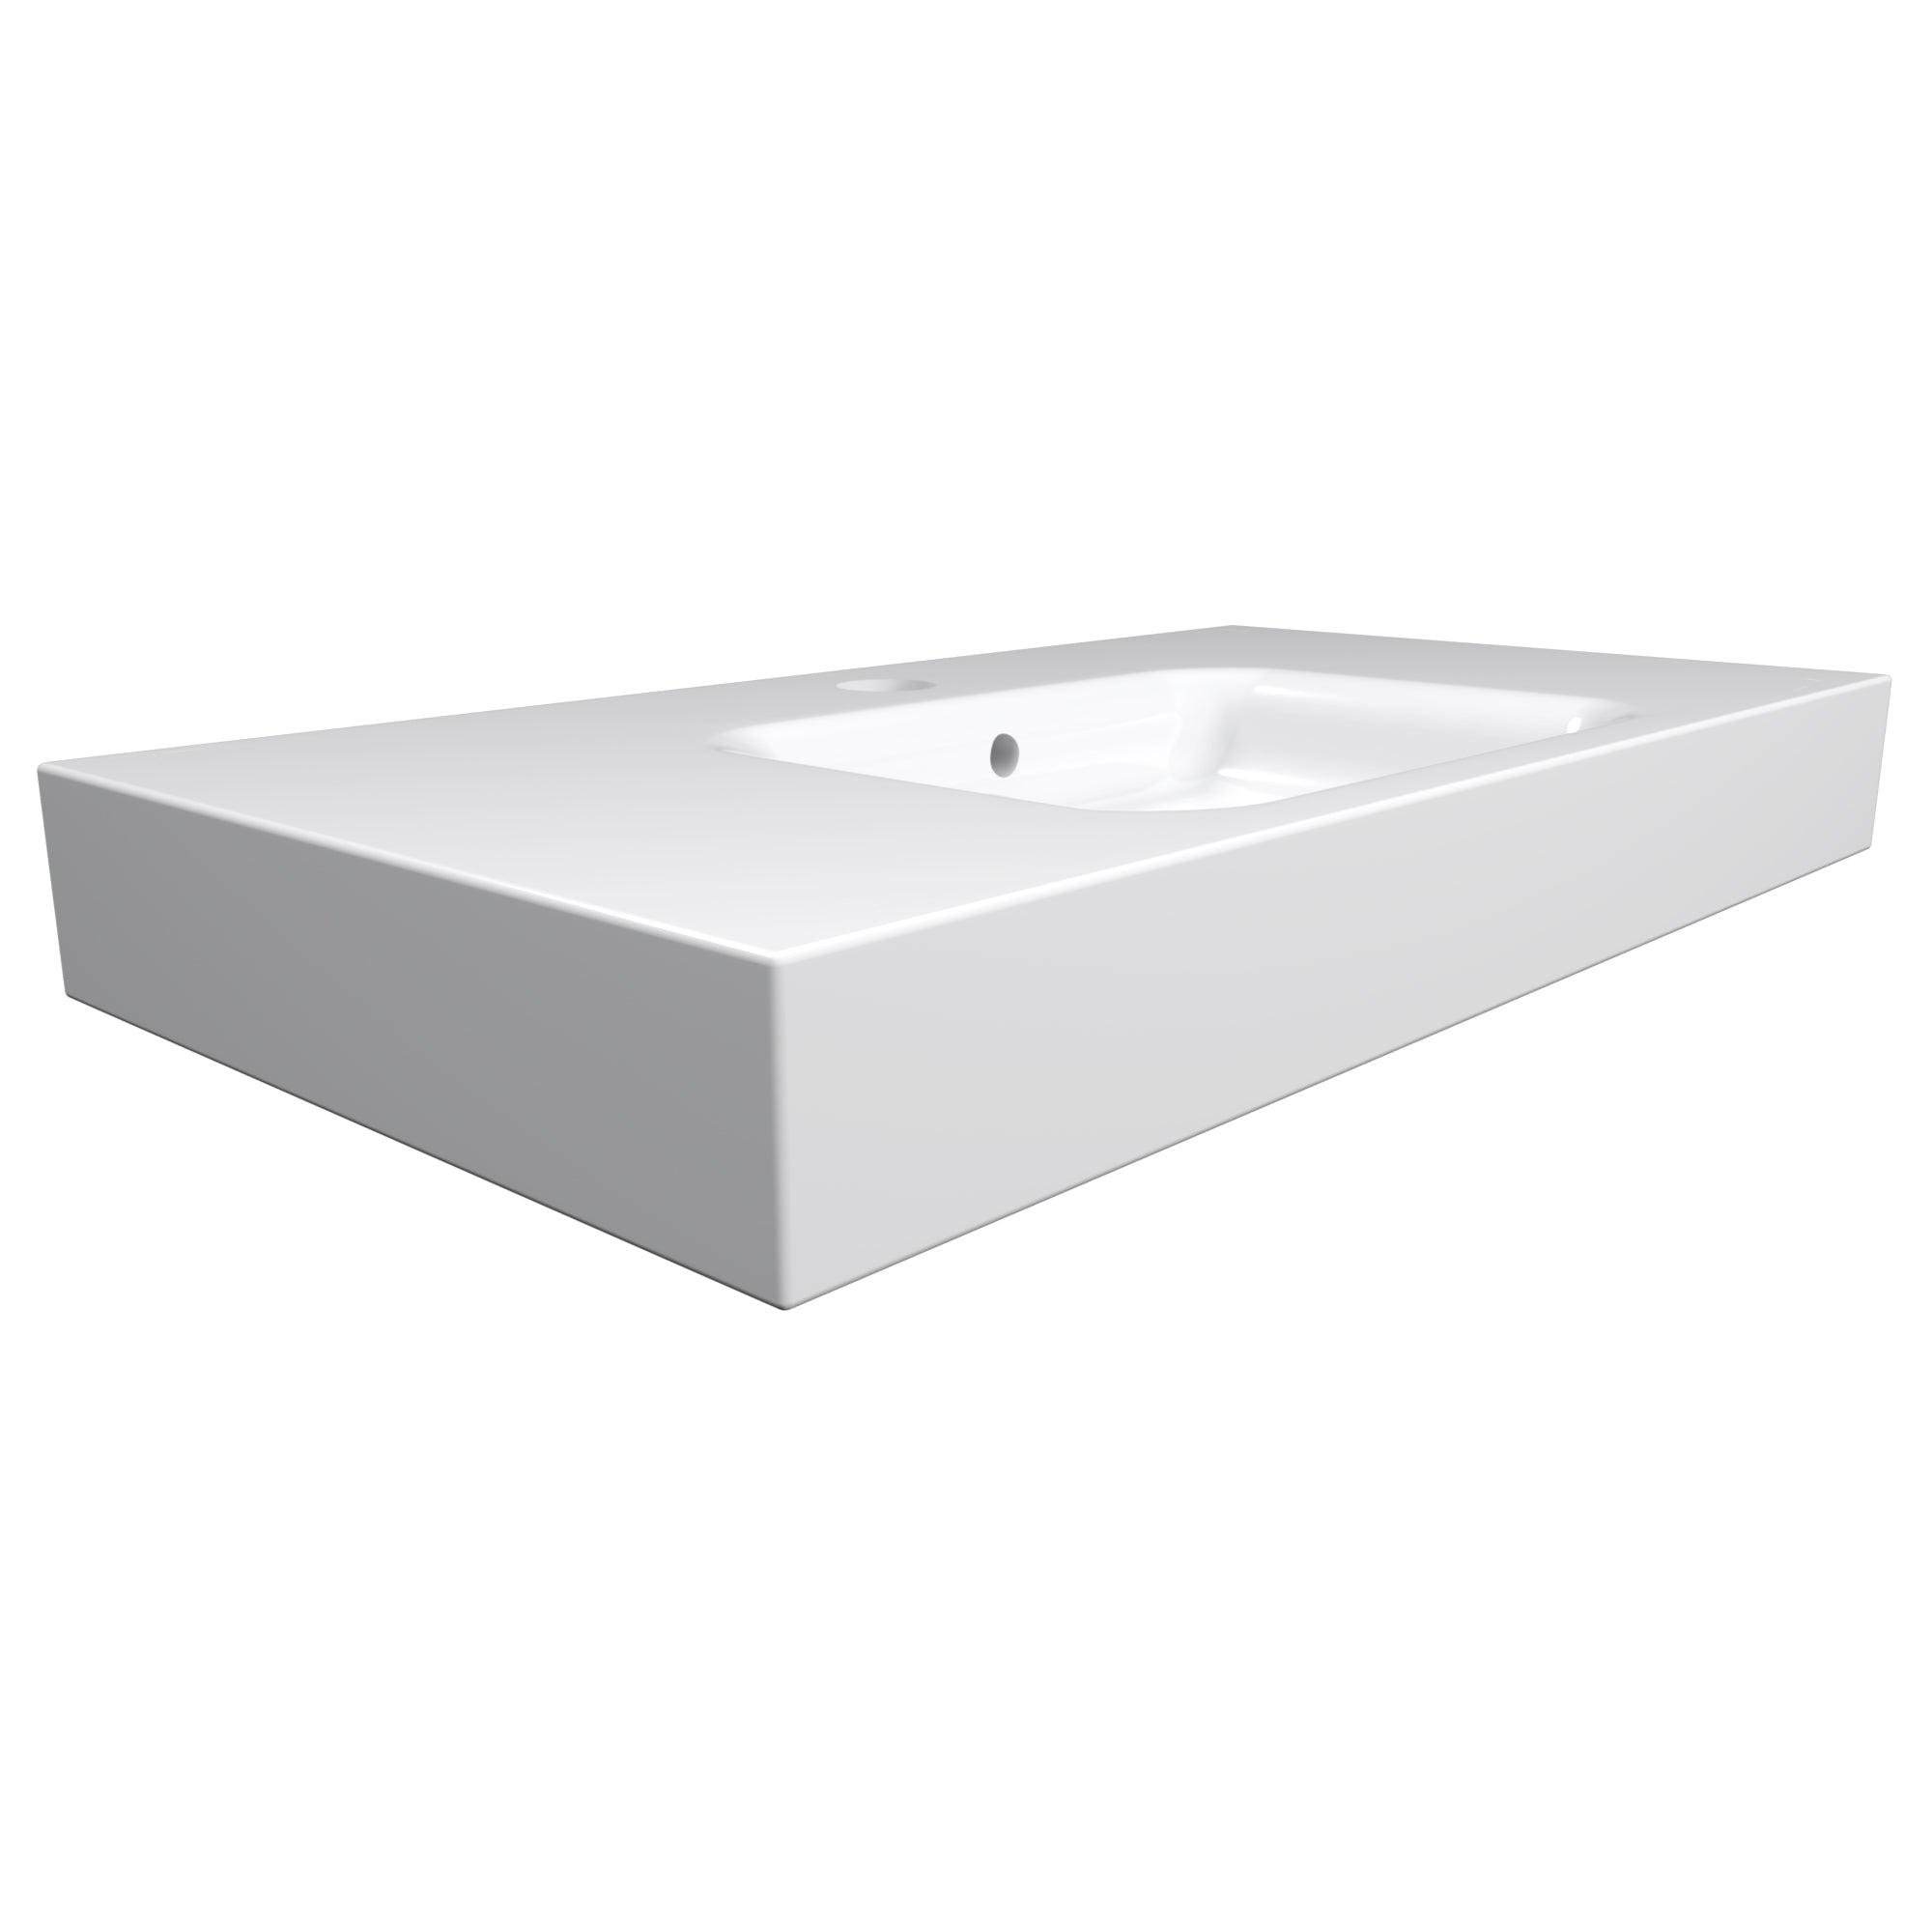 Cambridge Plumbing Sink CAM-H684-ORB Dolomite Mineral Composite 32" Wall Mounted Sink (5.5H x 32L x 18W)